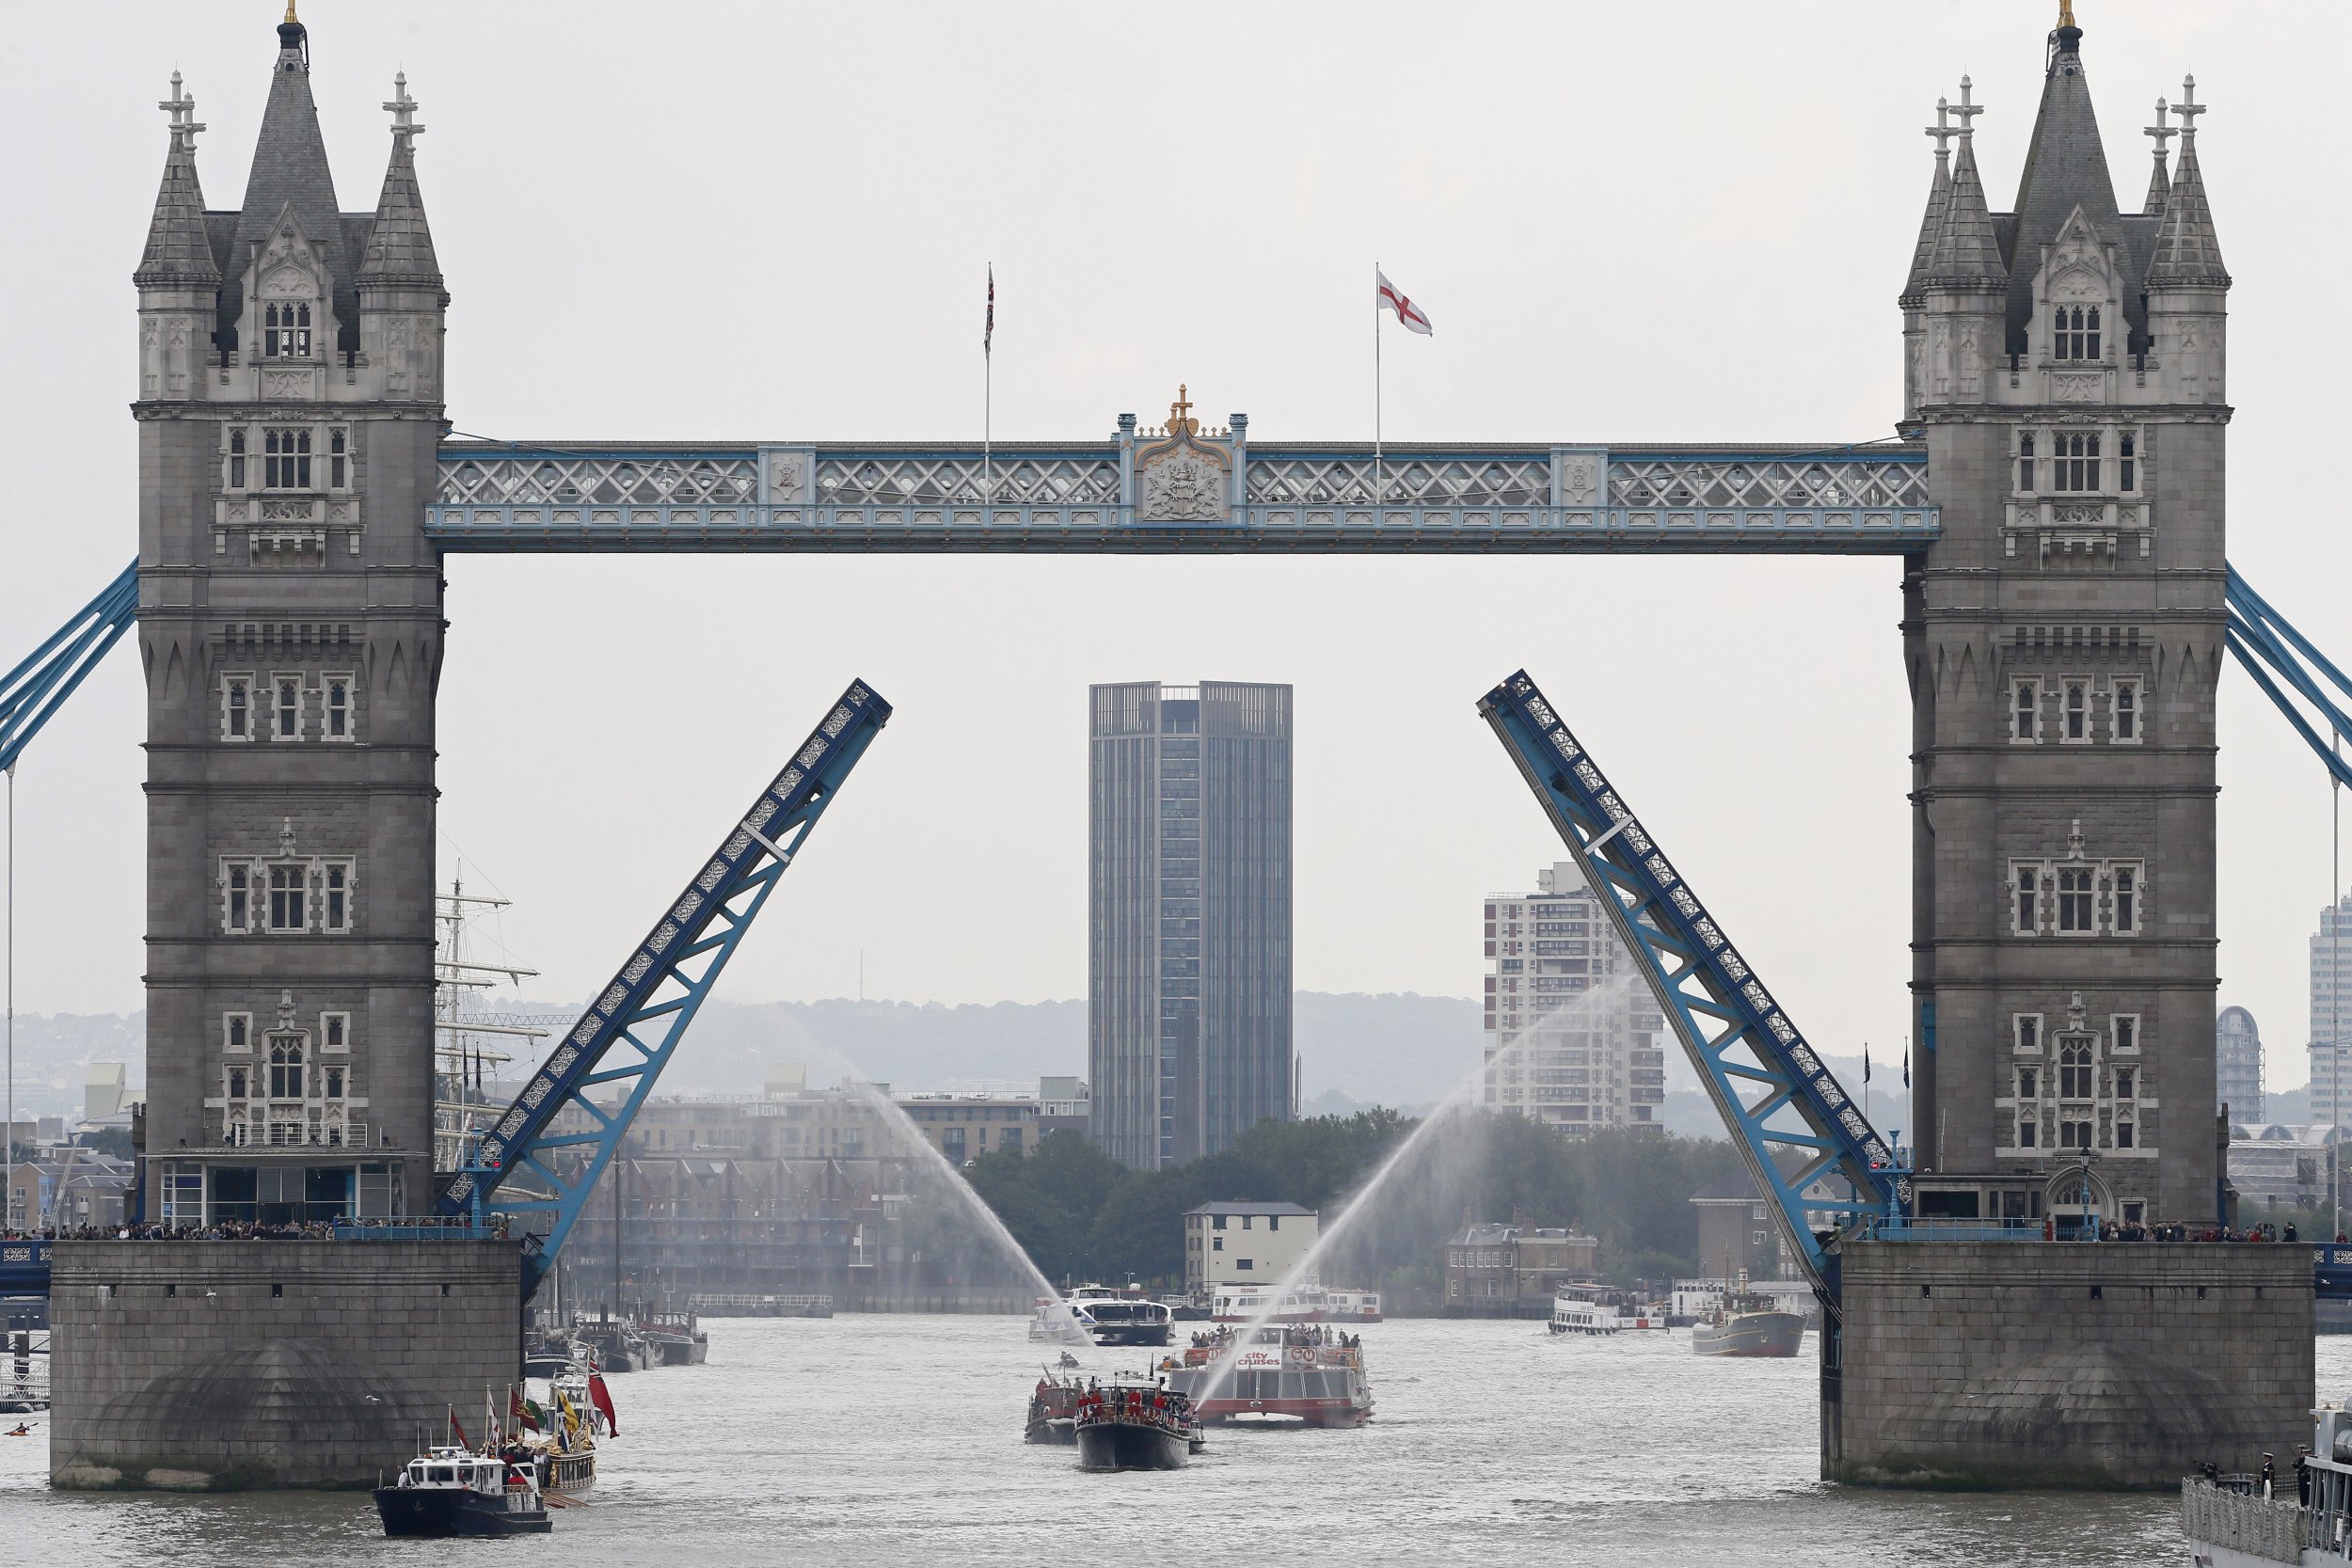 1258 A flotilla sails down the River Thames to celebrate Queen Elizabeth becoming the longest-reigning British monarch